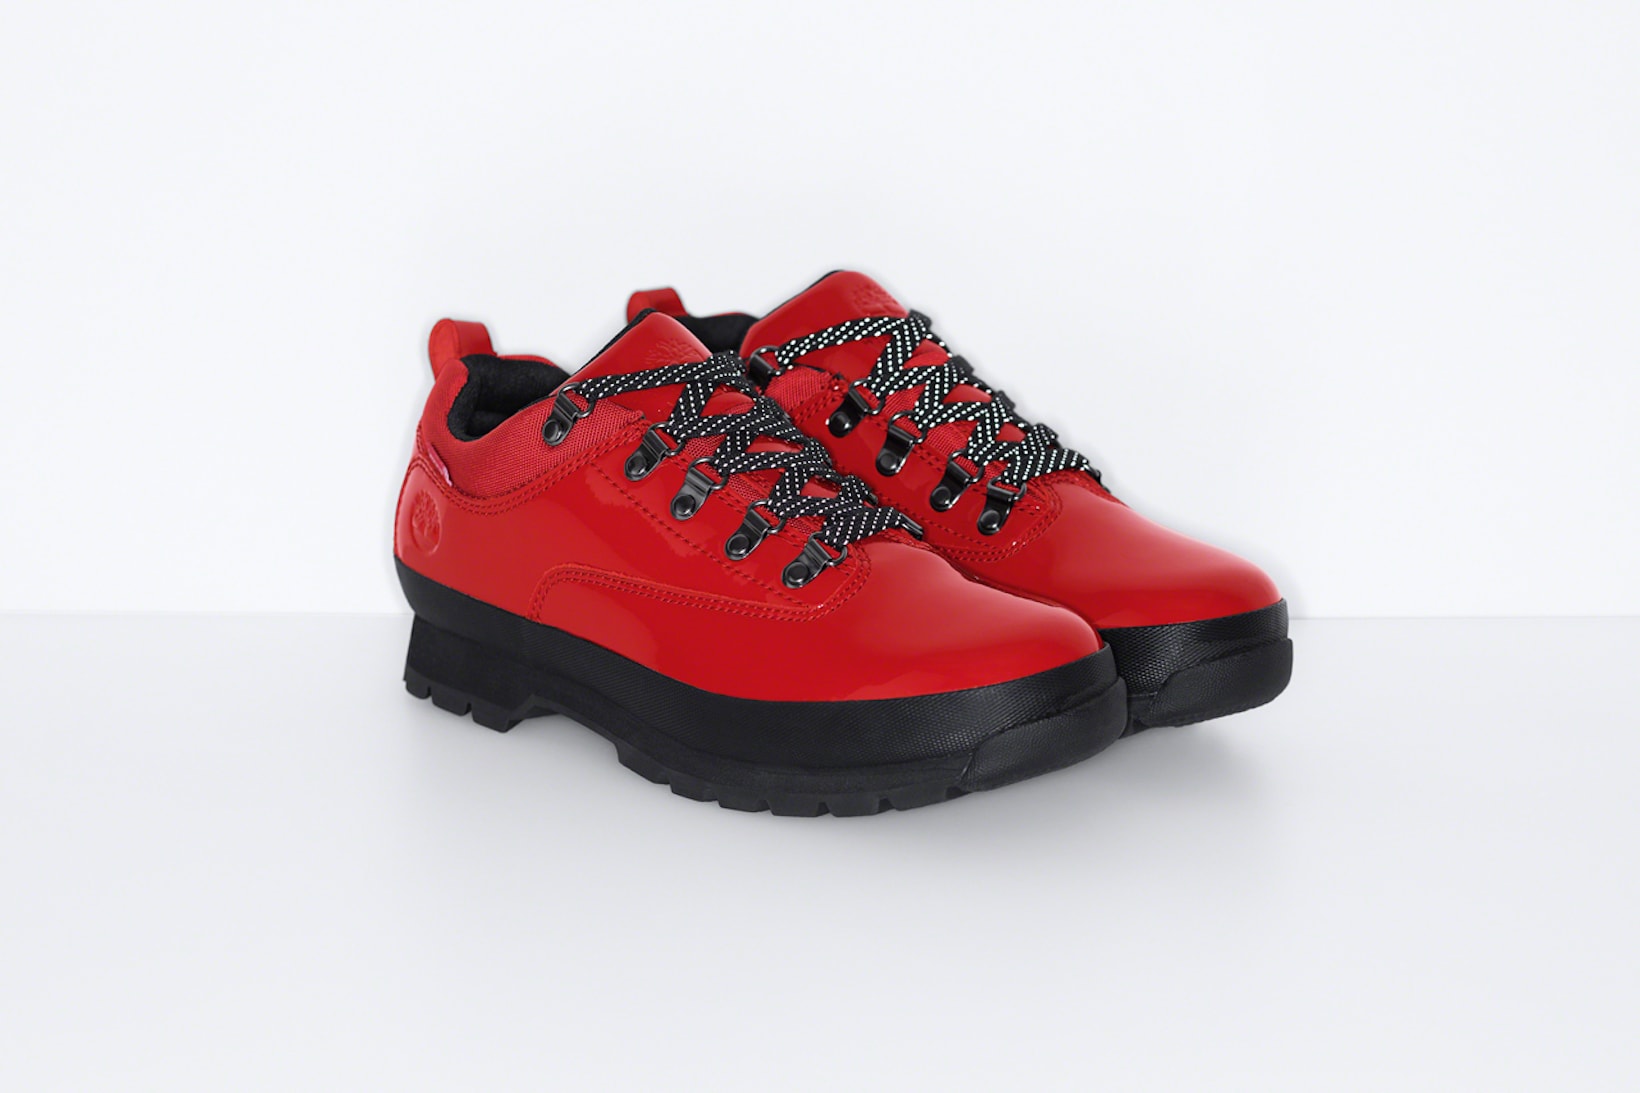 supreme timberland spring collaboration euro hiker low red yellow black shoes footwear 